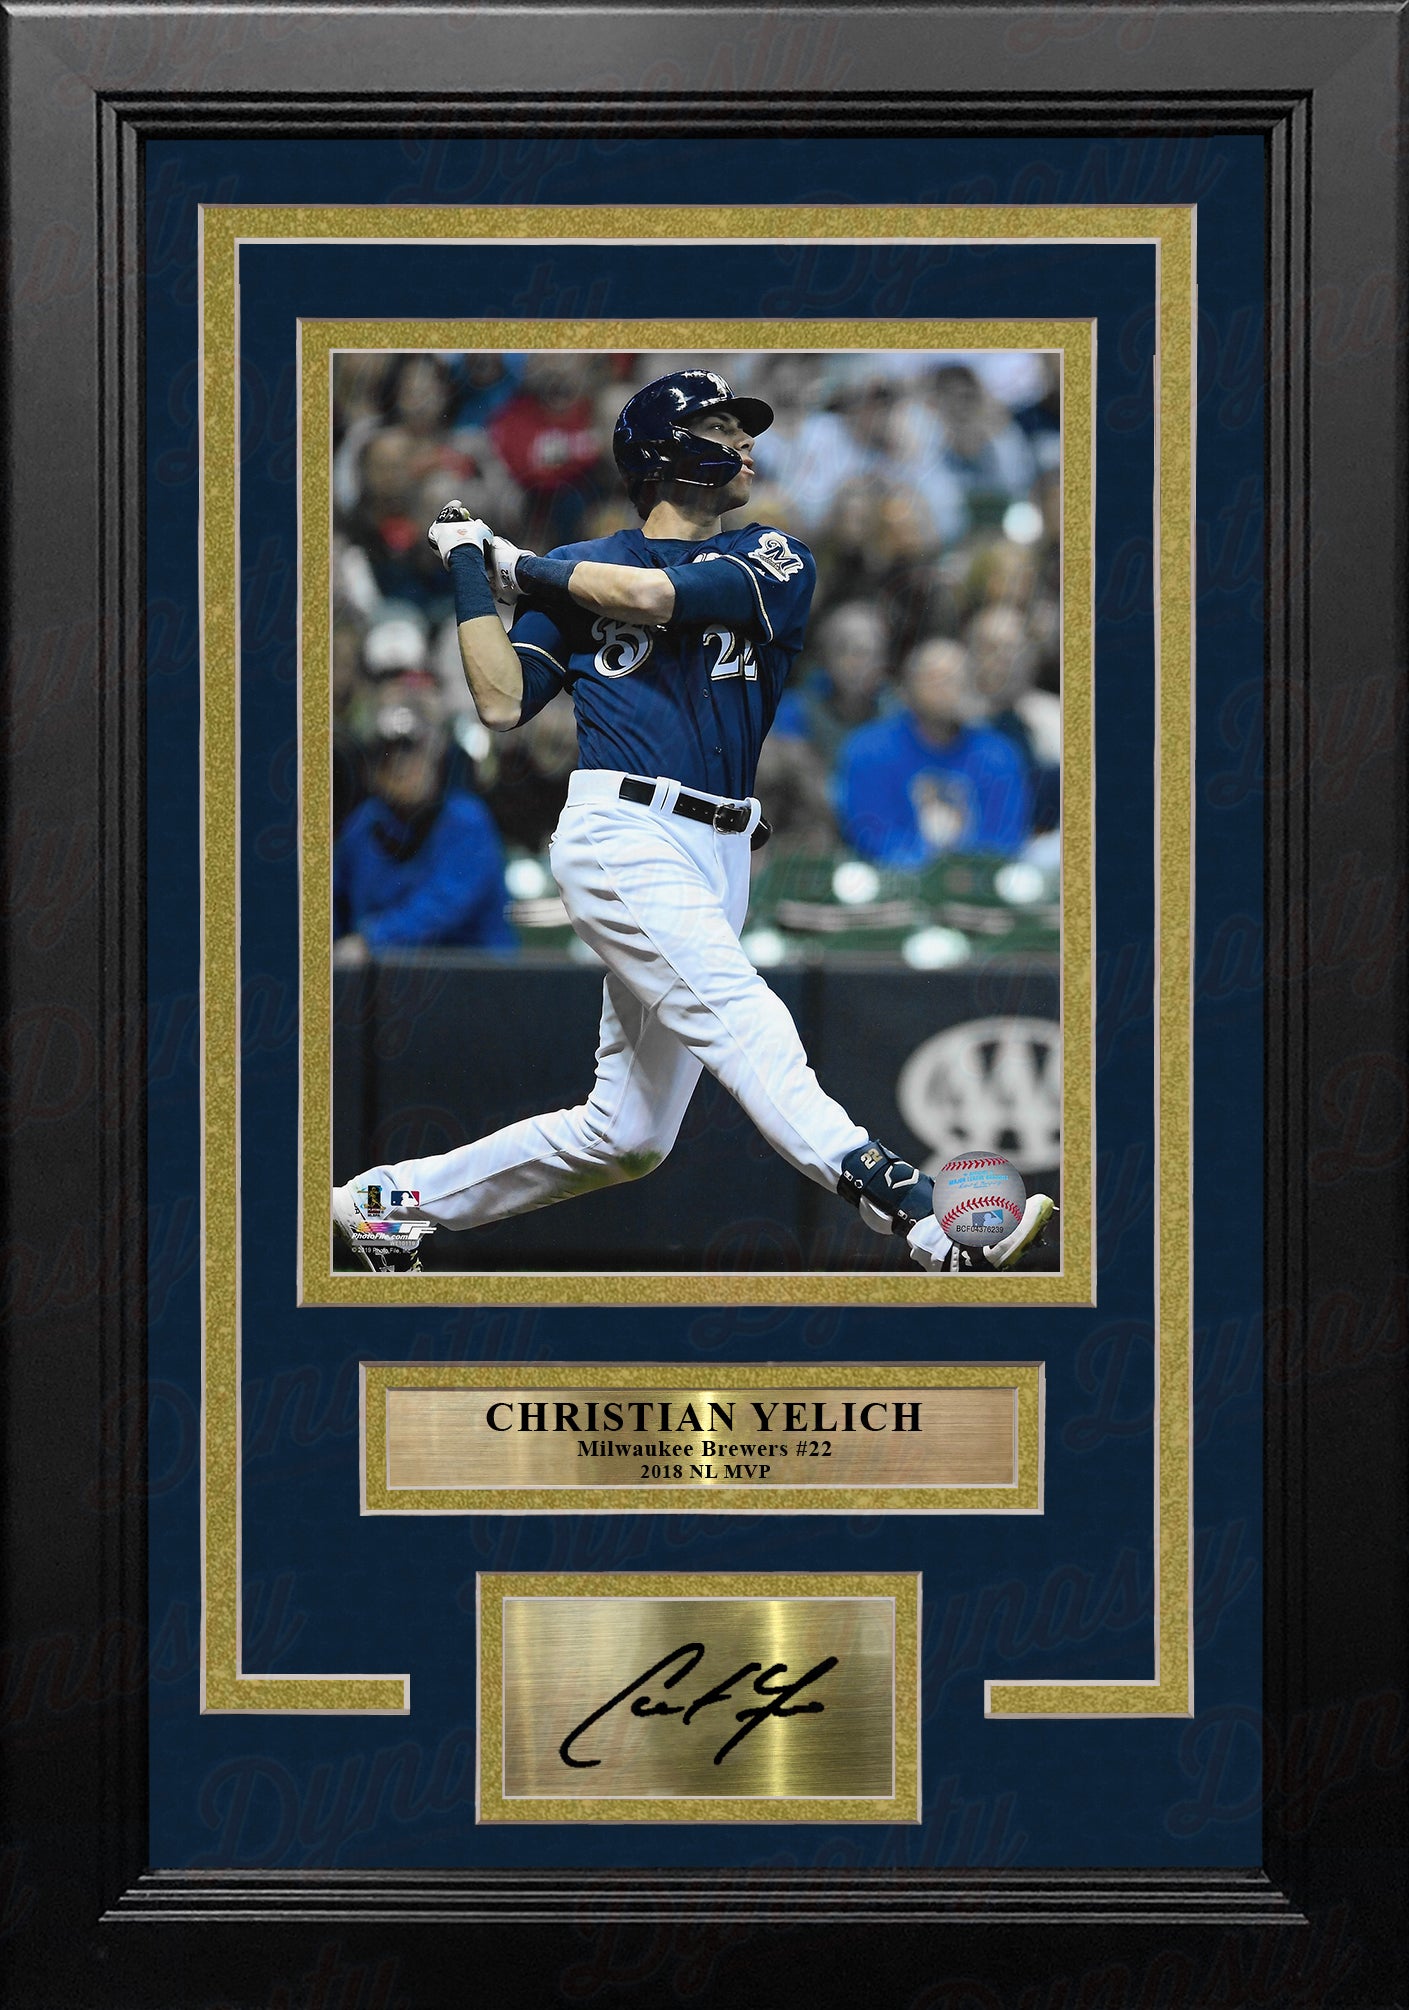 Christian Yelich Milwaukee Brewers Autographed Framed Majestic Pinstripe Replica Jersey Collage